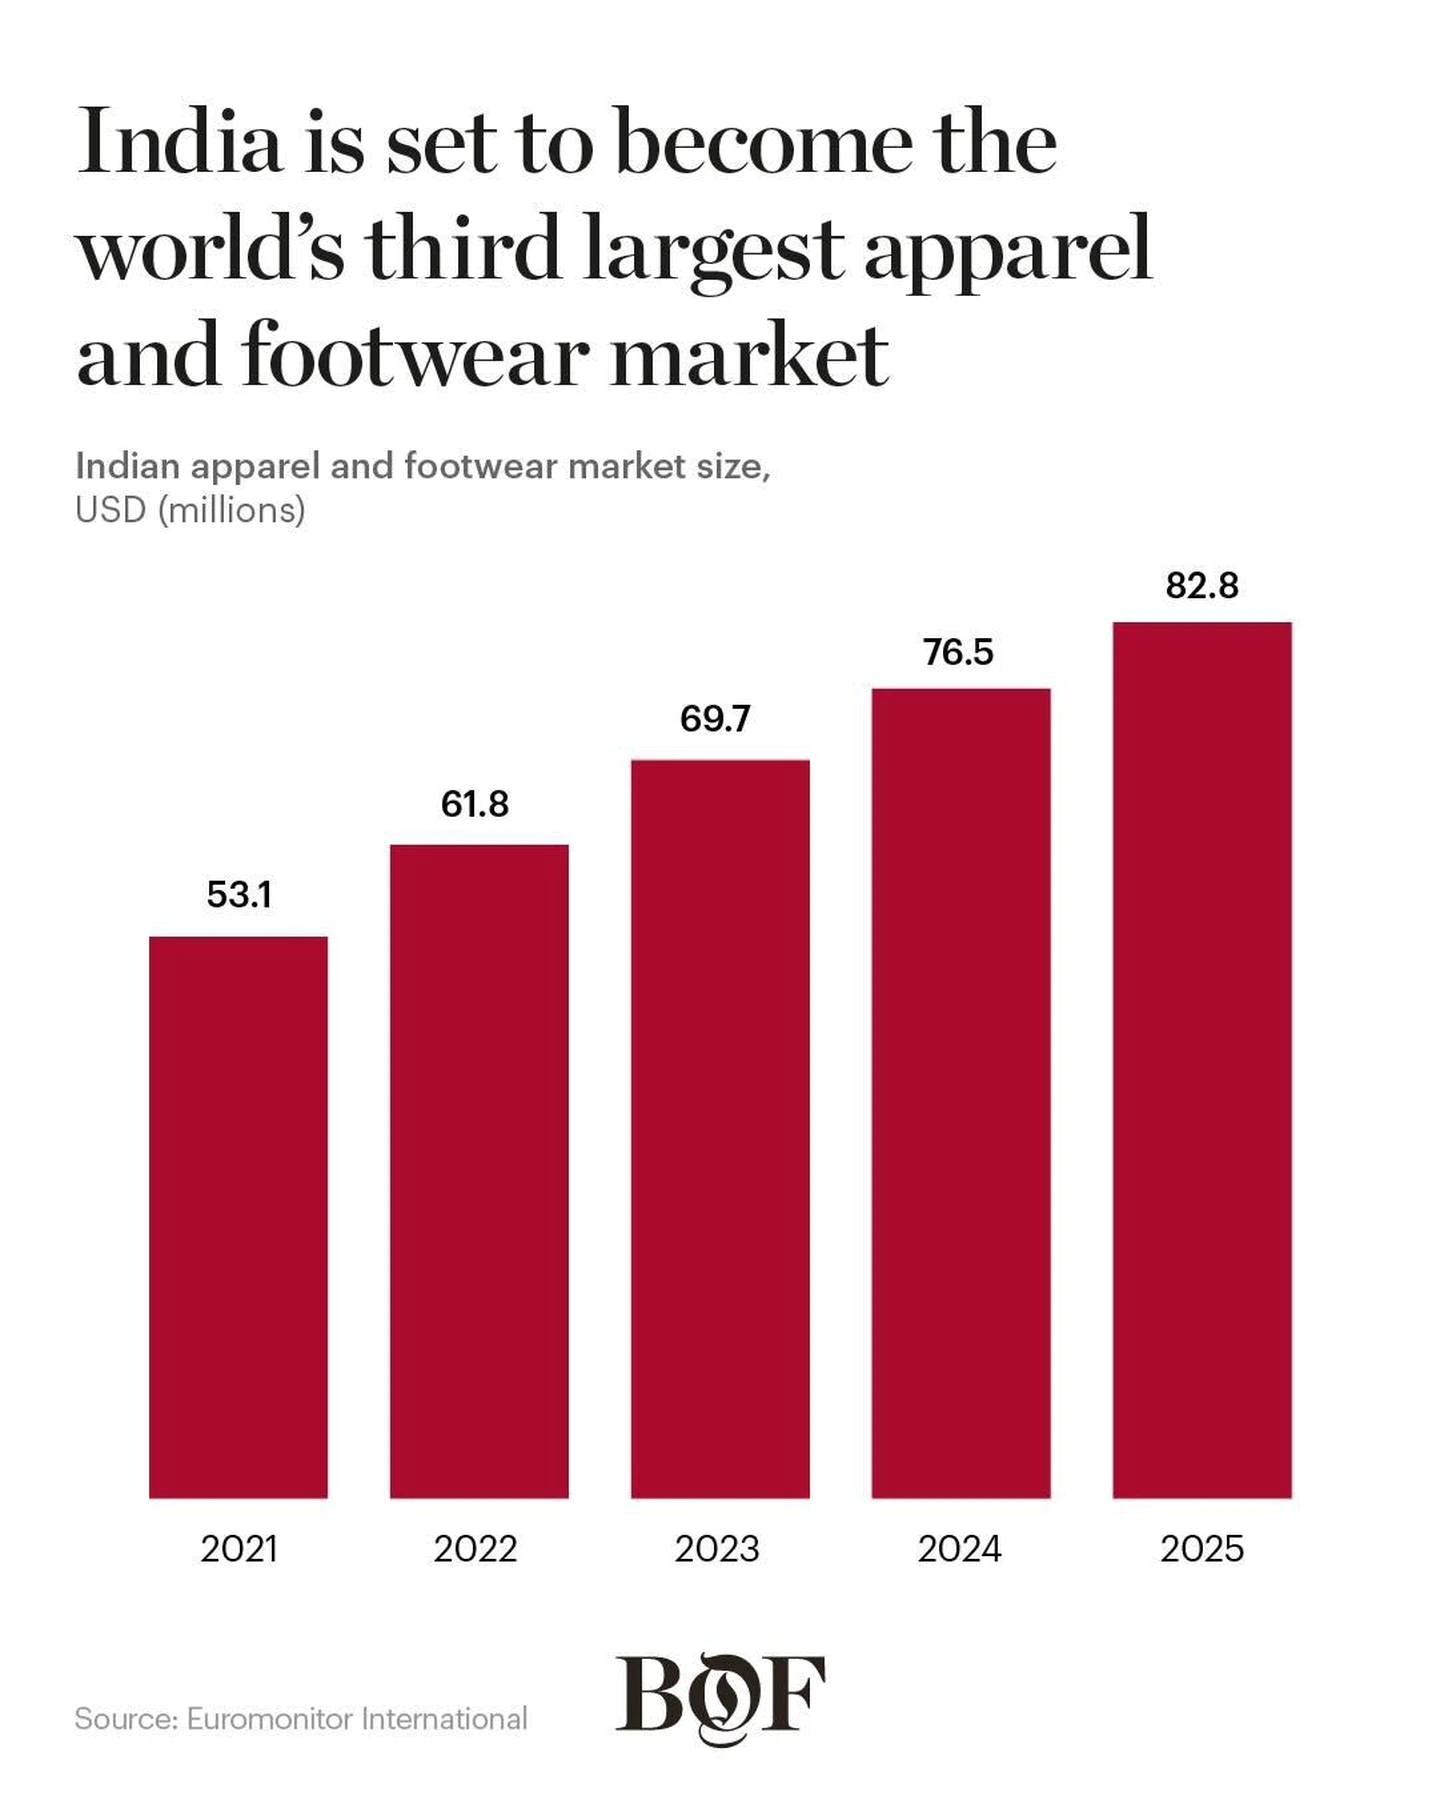 India is set to become the world's third-largest apparel and footwear market.